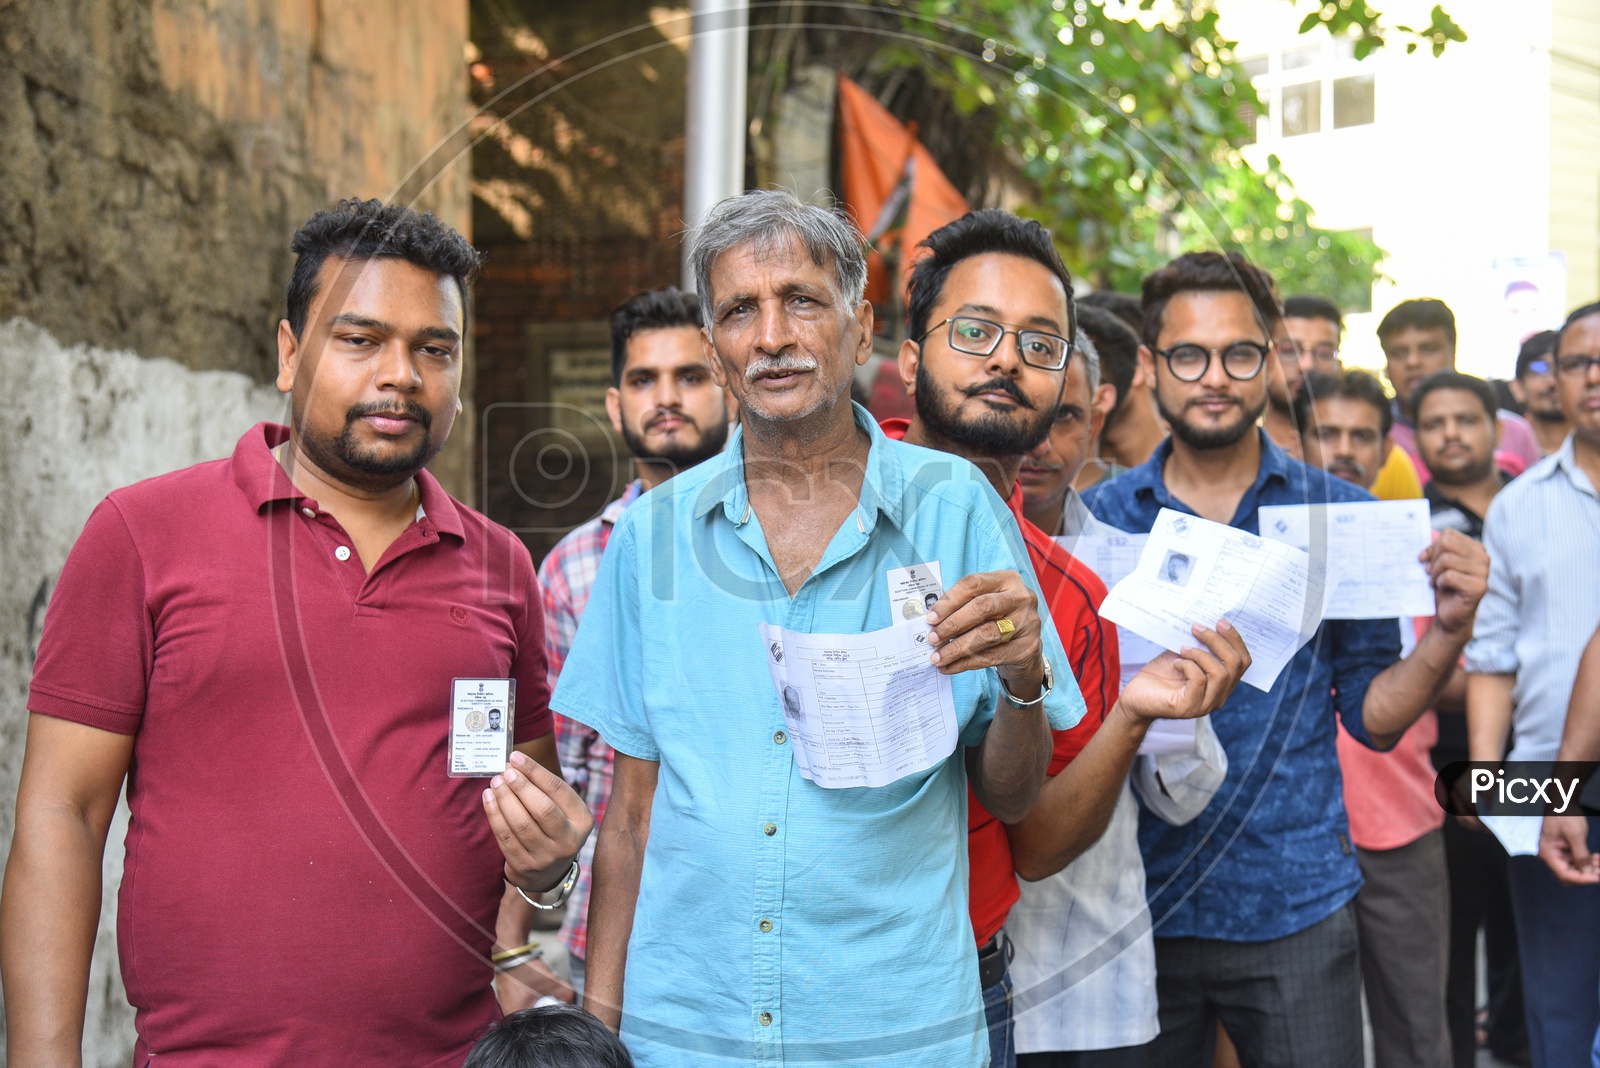 Indian Voters Showing The Voter Slips Or Id Cards At Polling Both In West Bengal During The Lok Sabha General elections 2019